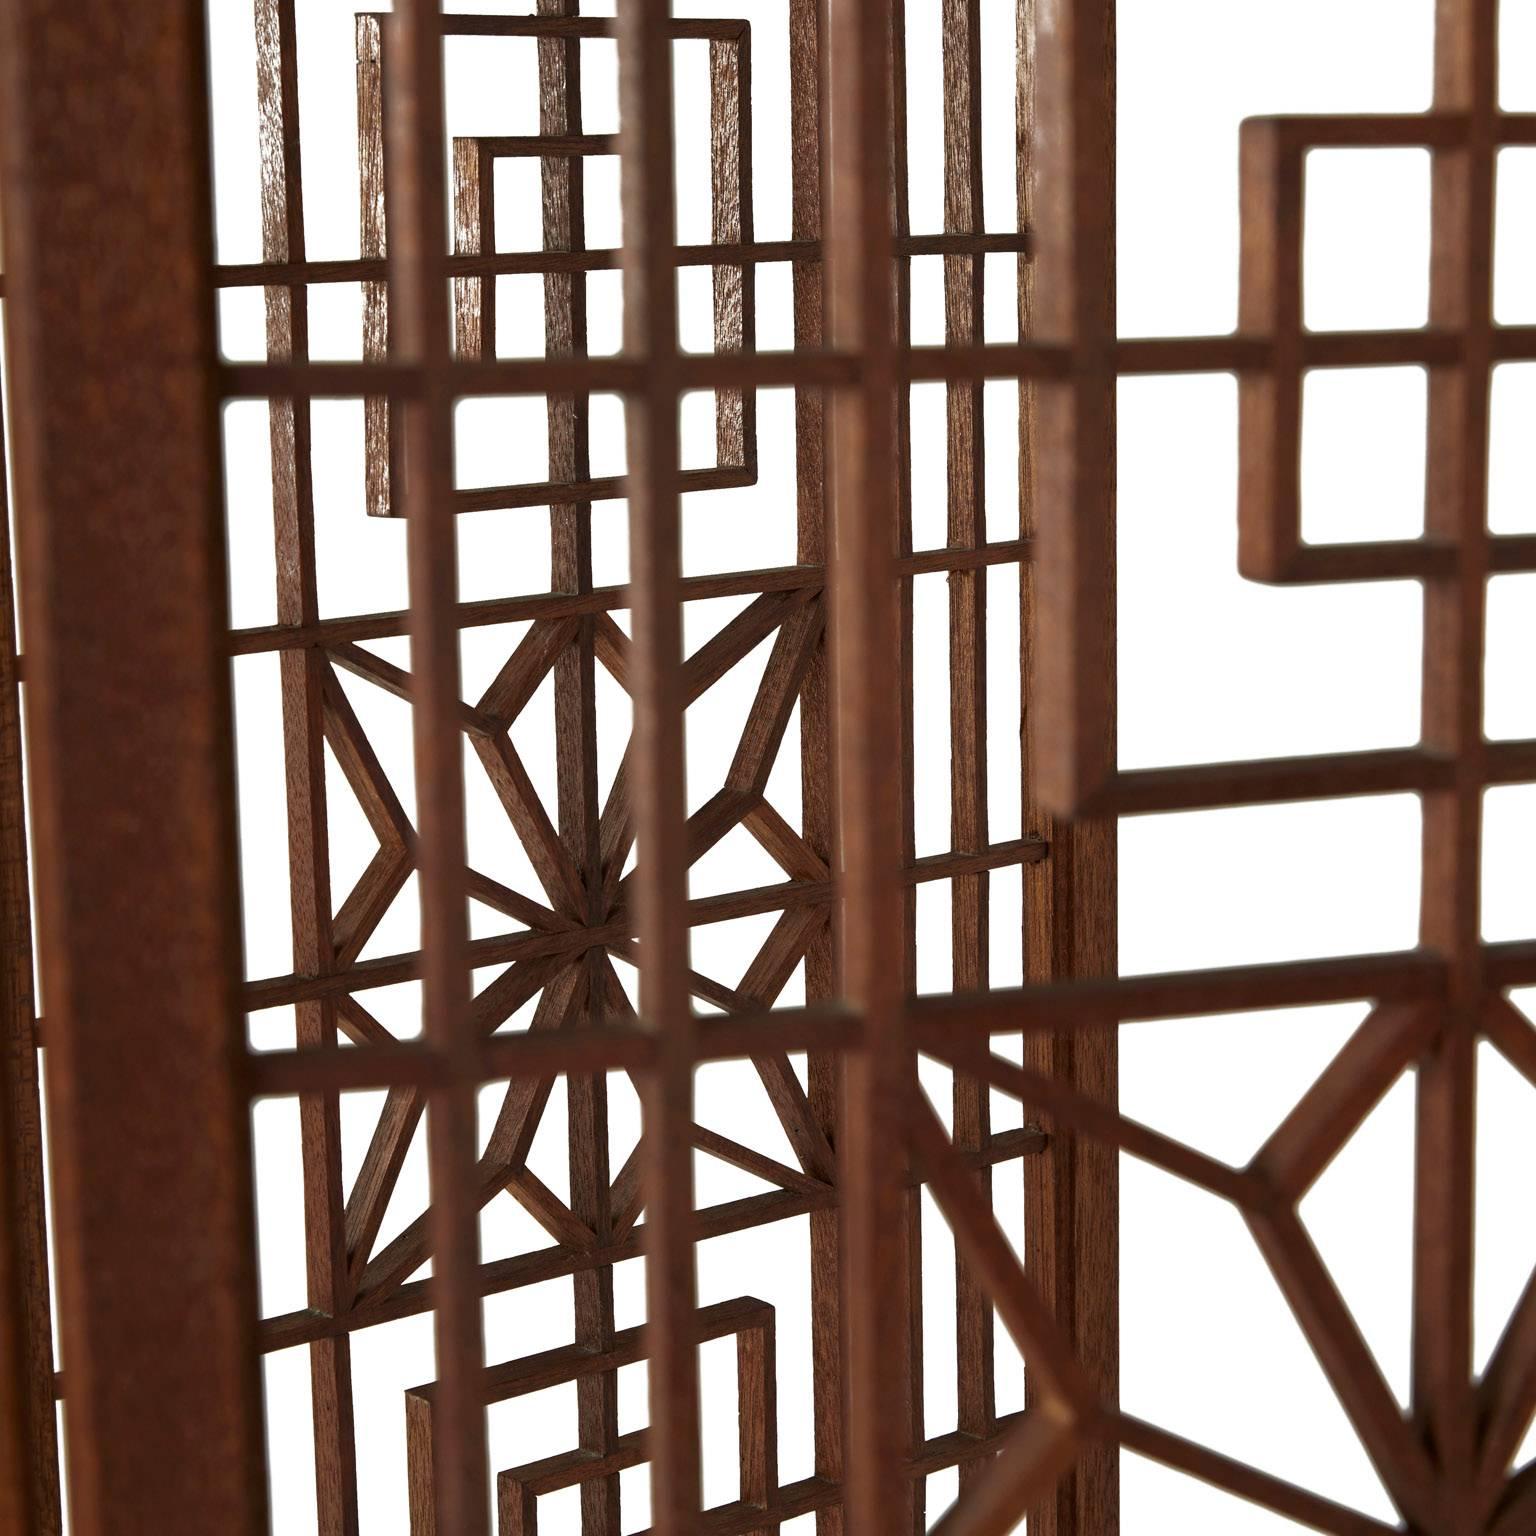 Illustrative of the 1960s design movement, this elegant Moroccan inspired room divider fabricated from teak incorporates both latticed and woven pieces.

The central detailed latticed portion is made up of small wood pieces precisely cut to